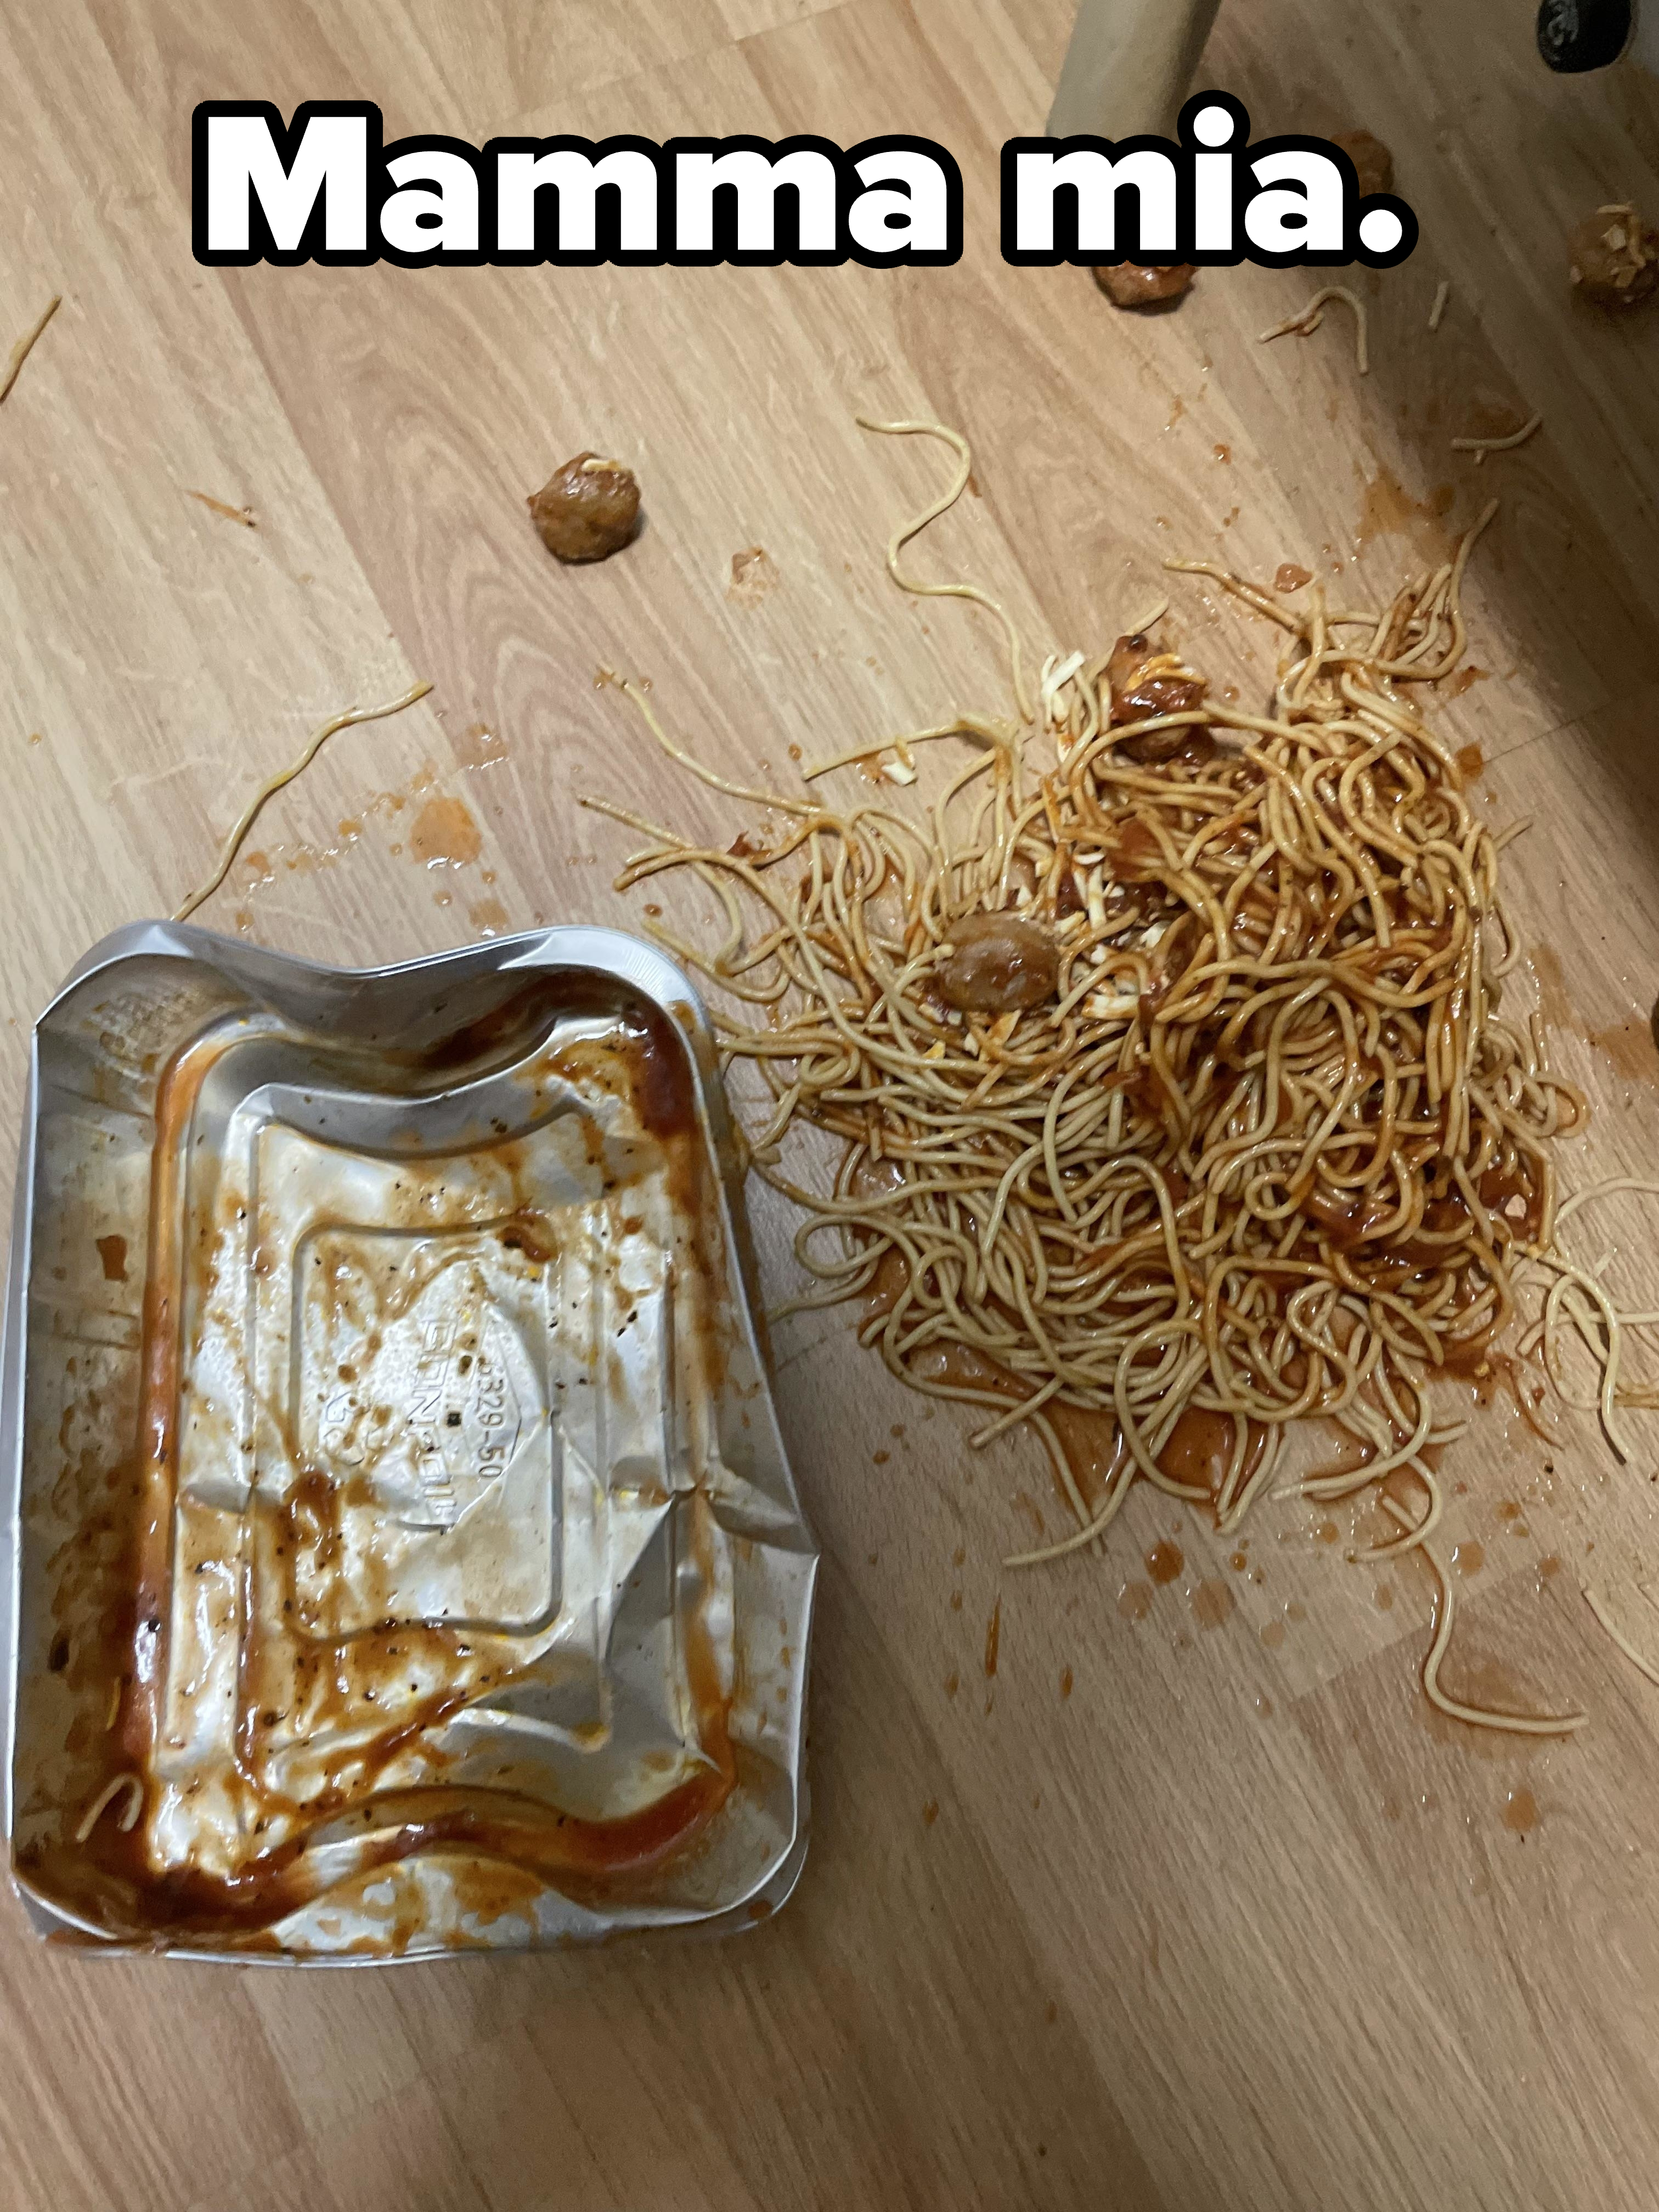 Spilled spaghetti and meatballs and an empty container on a wooden floor